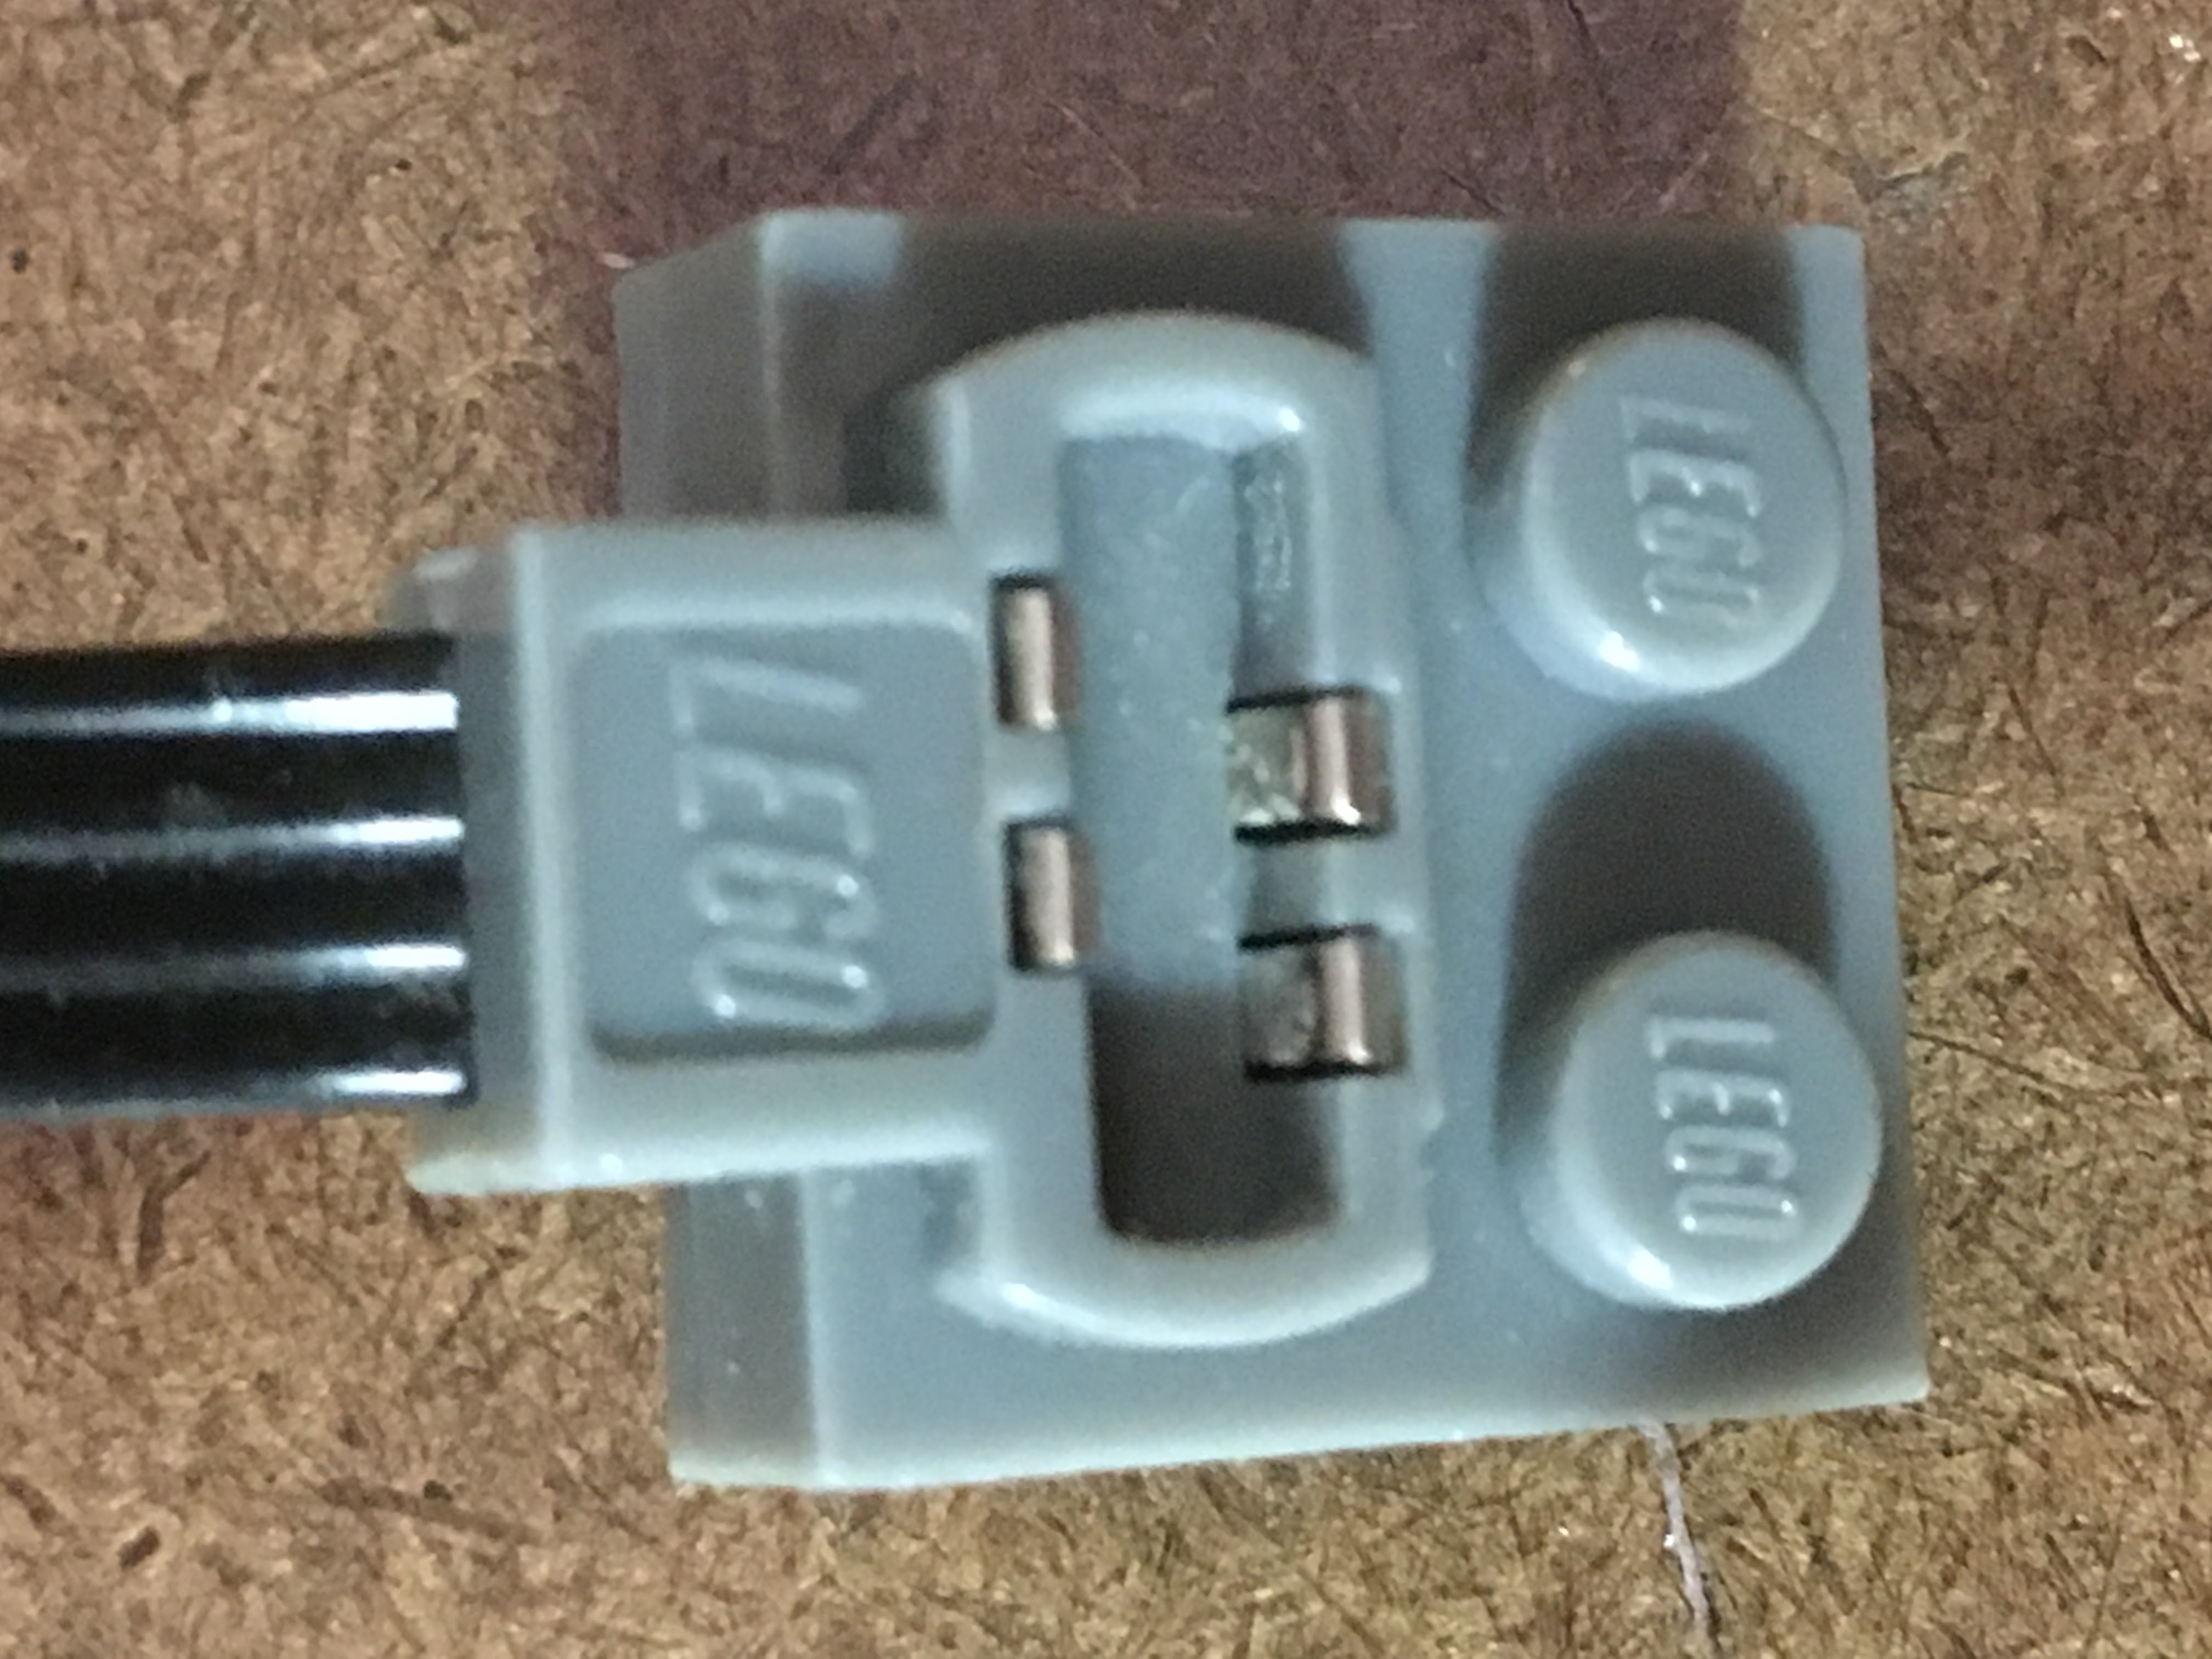 the connector for all Lego power functions